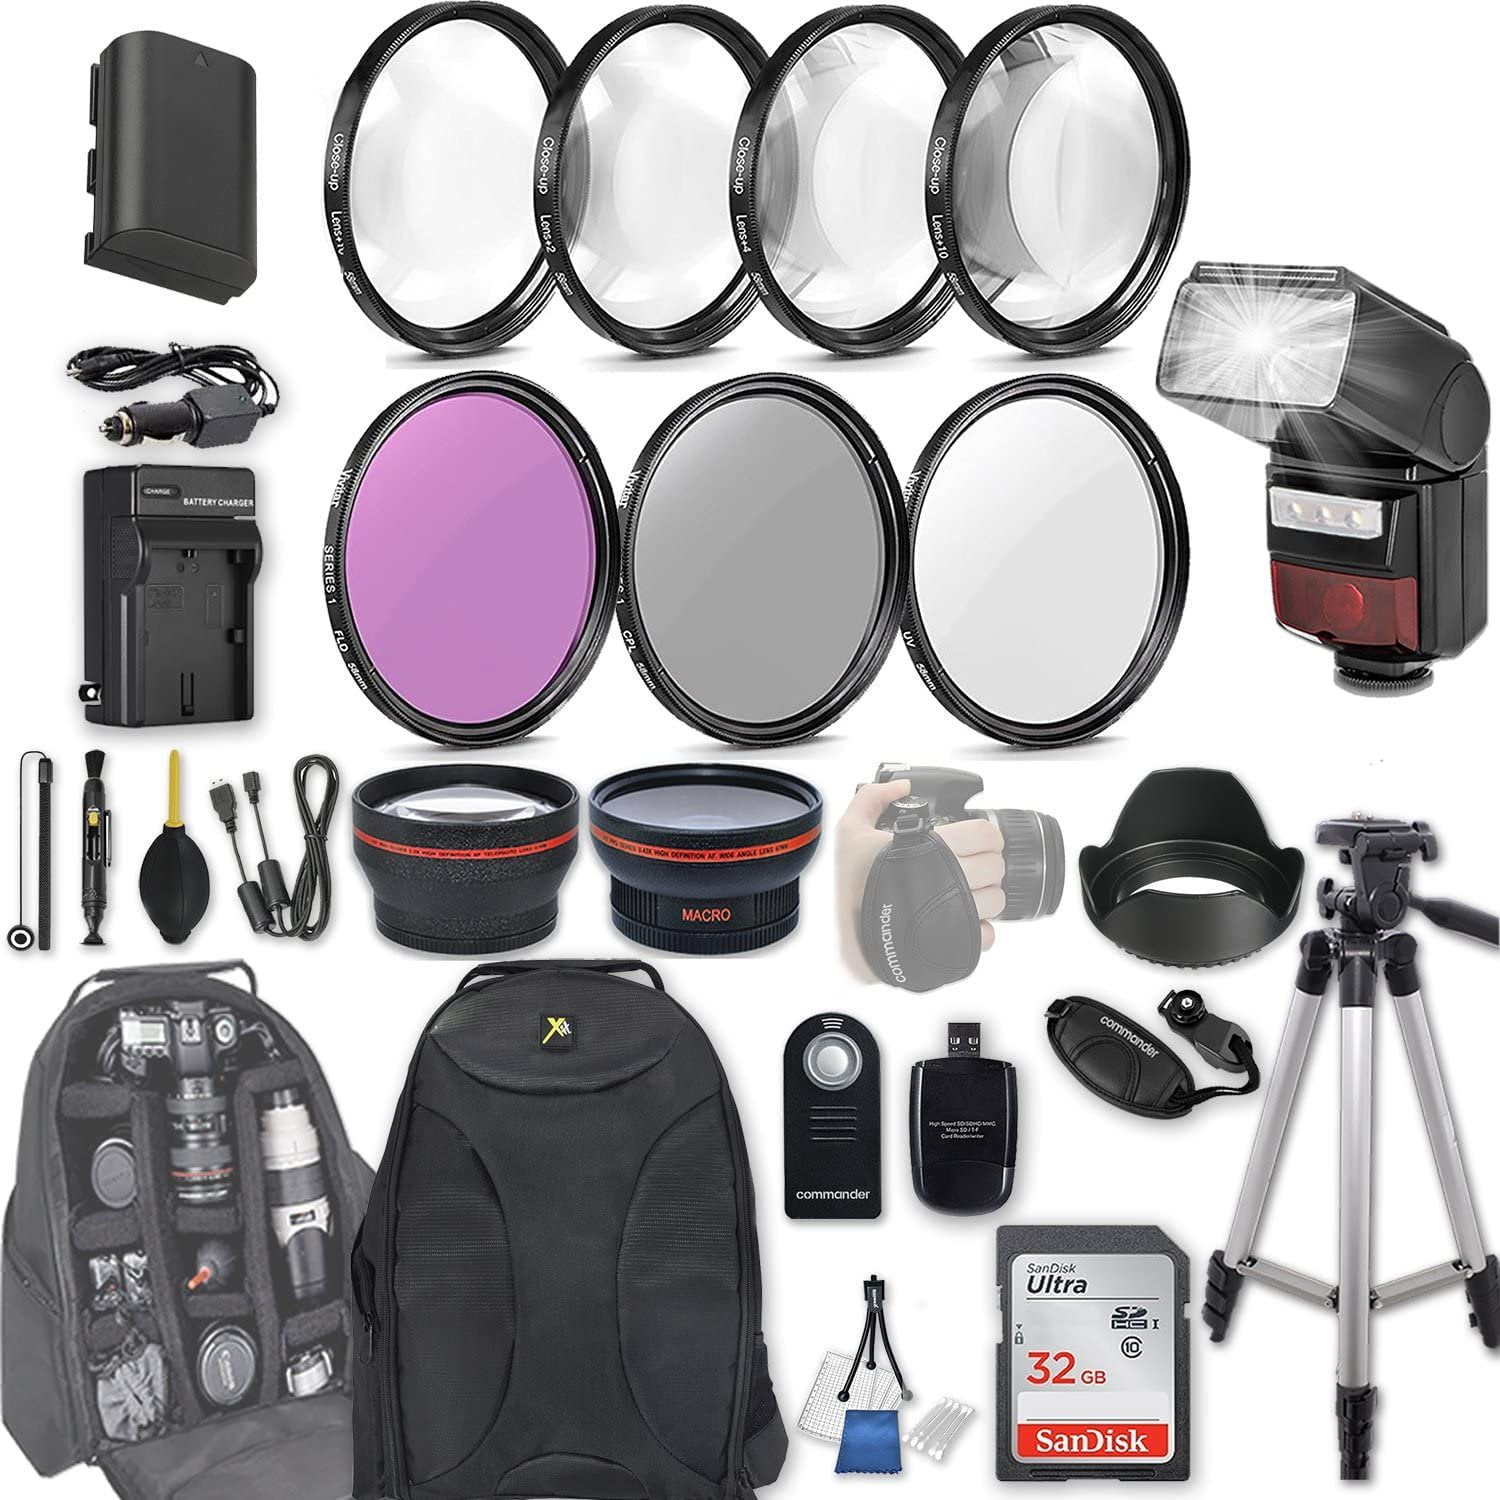 58mm 28 Pc Accessory Kit for EOS Rebel 70D, 80D DSLRs with 0.43x Wide 2.2X Telephoto Lens, LED-Flash, 32GB SD, Filter Macro Kits, Backpack Case, and More -